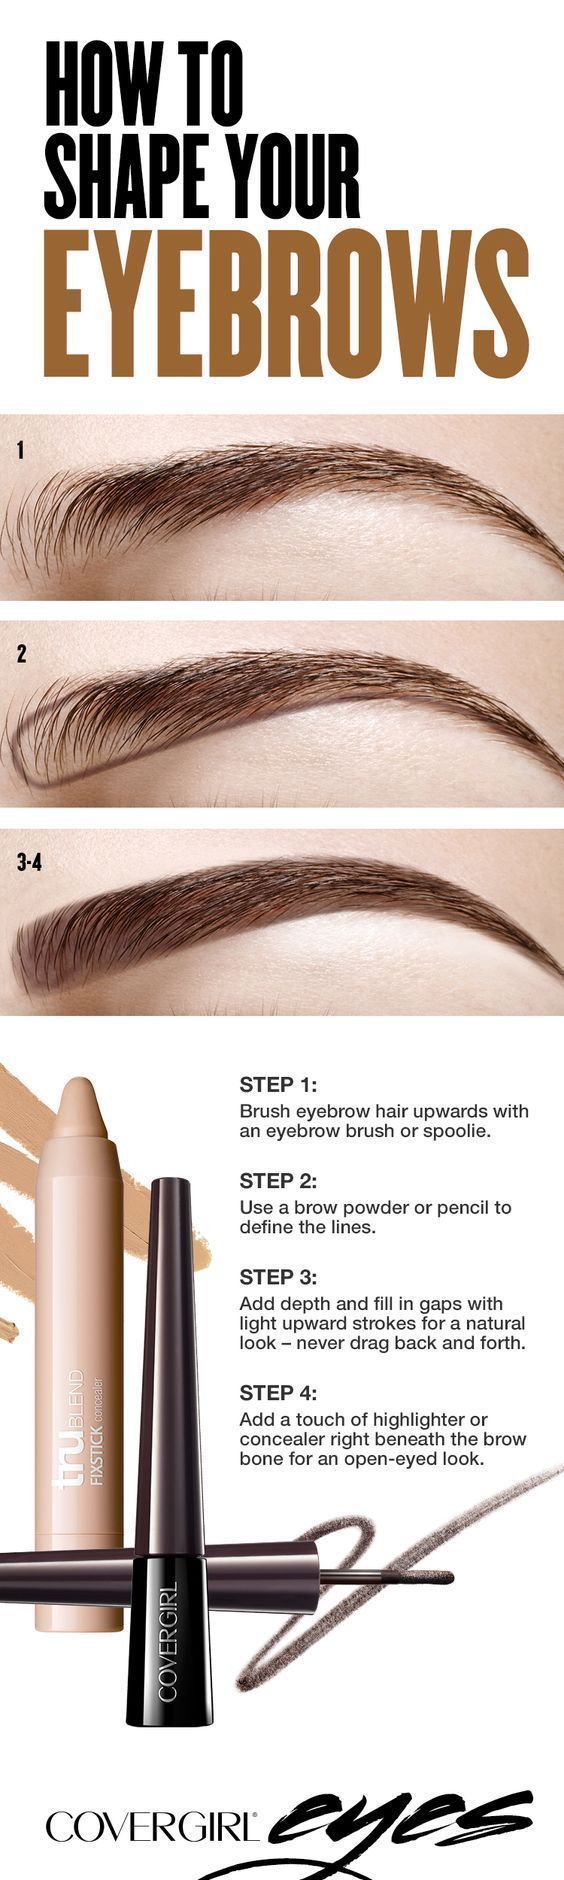 Filling in your eyebrows doesn’t have to be a lengthy process. Keep it simple by using a brow powder or pencil to define a bottom